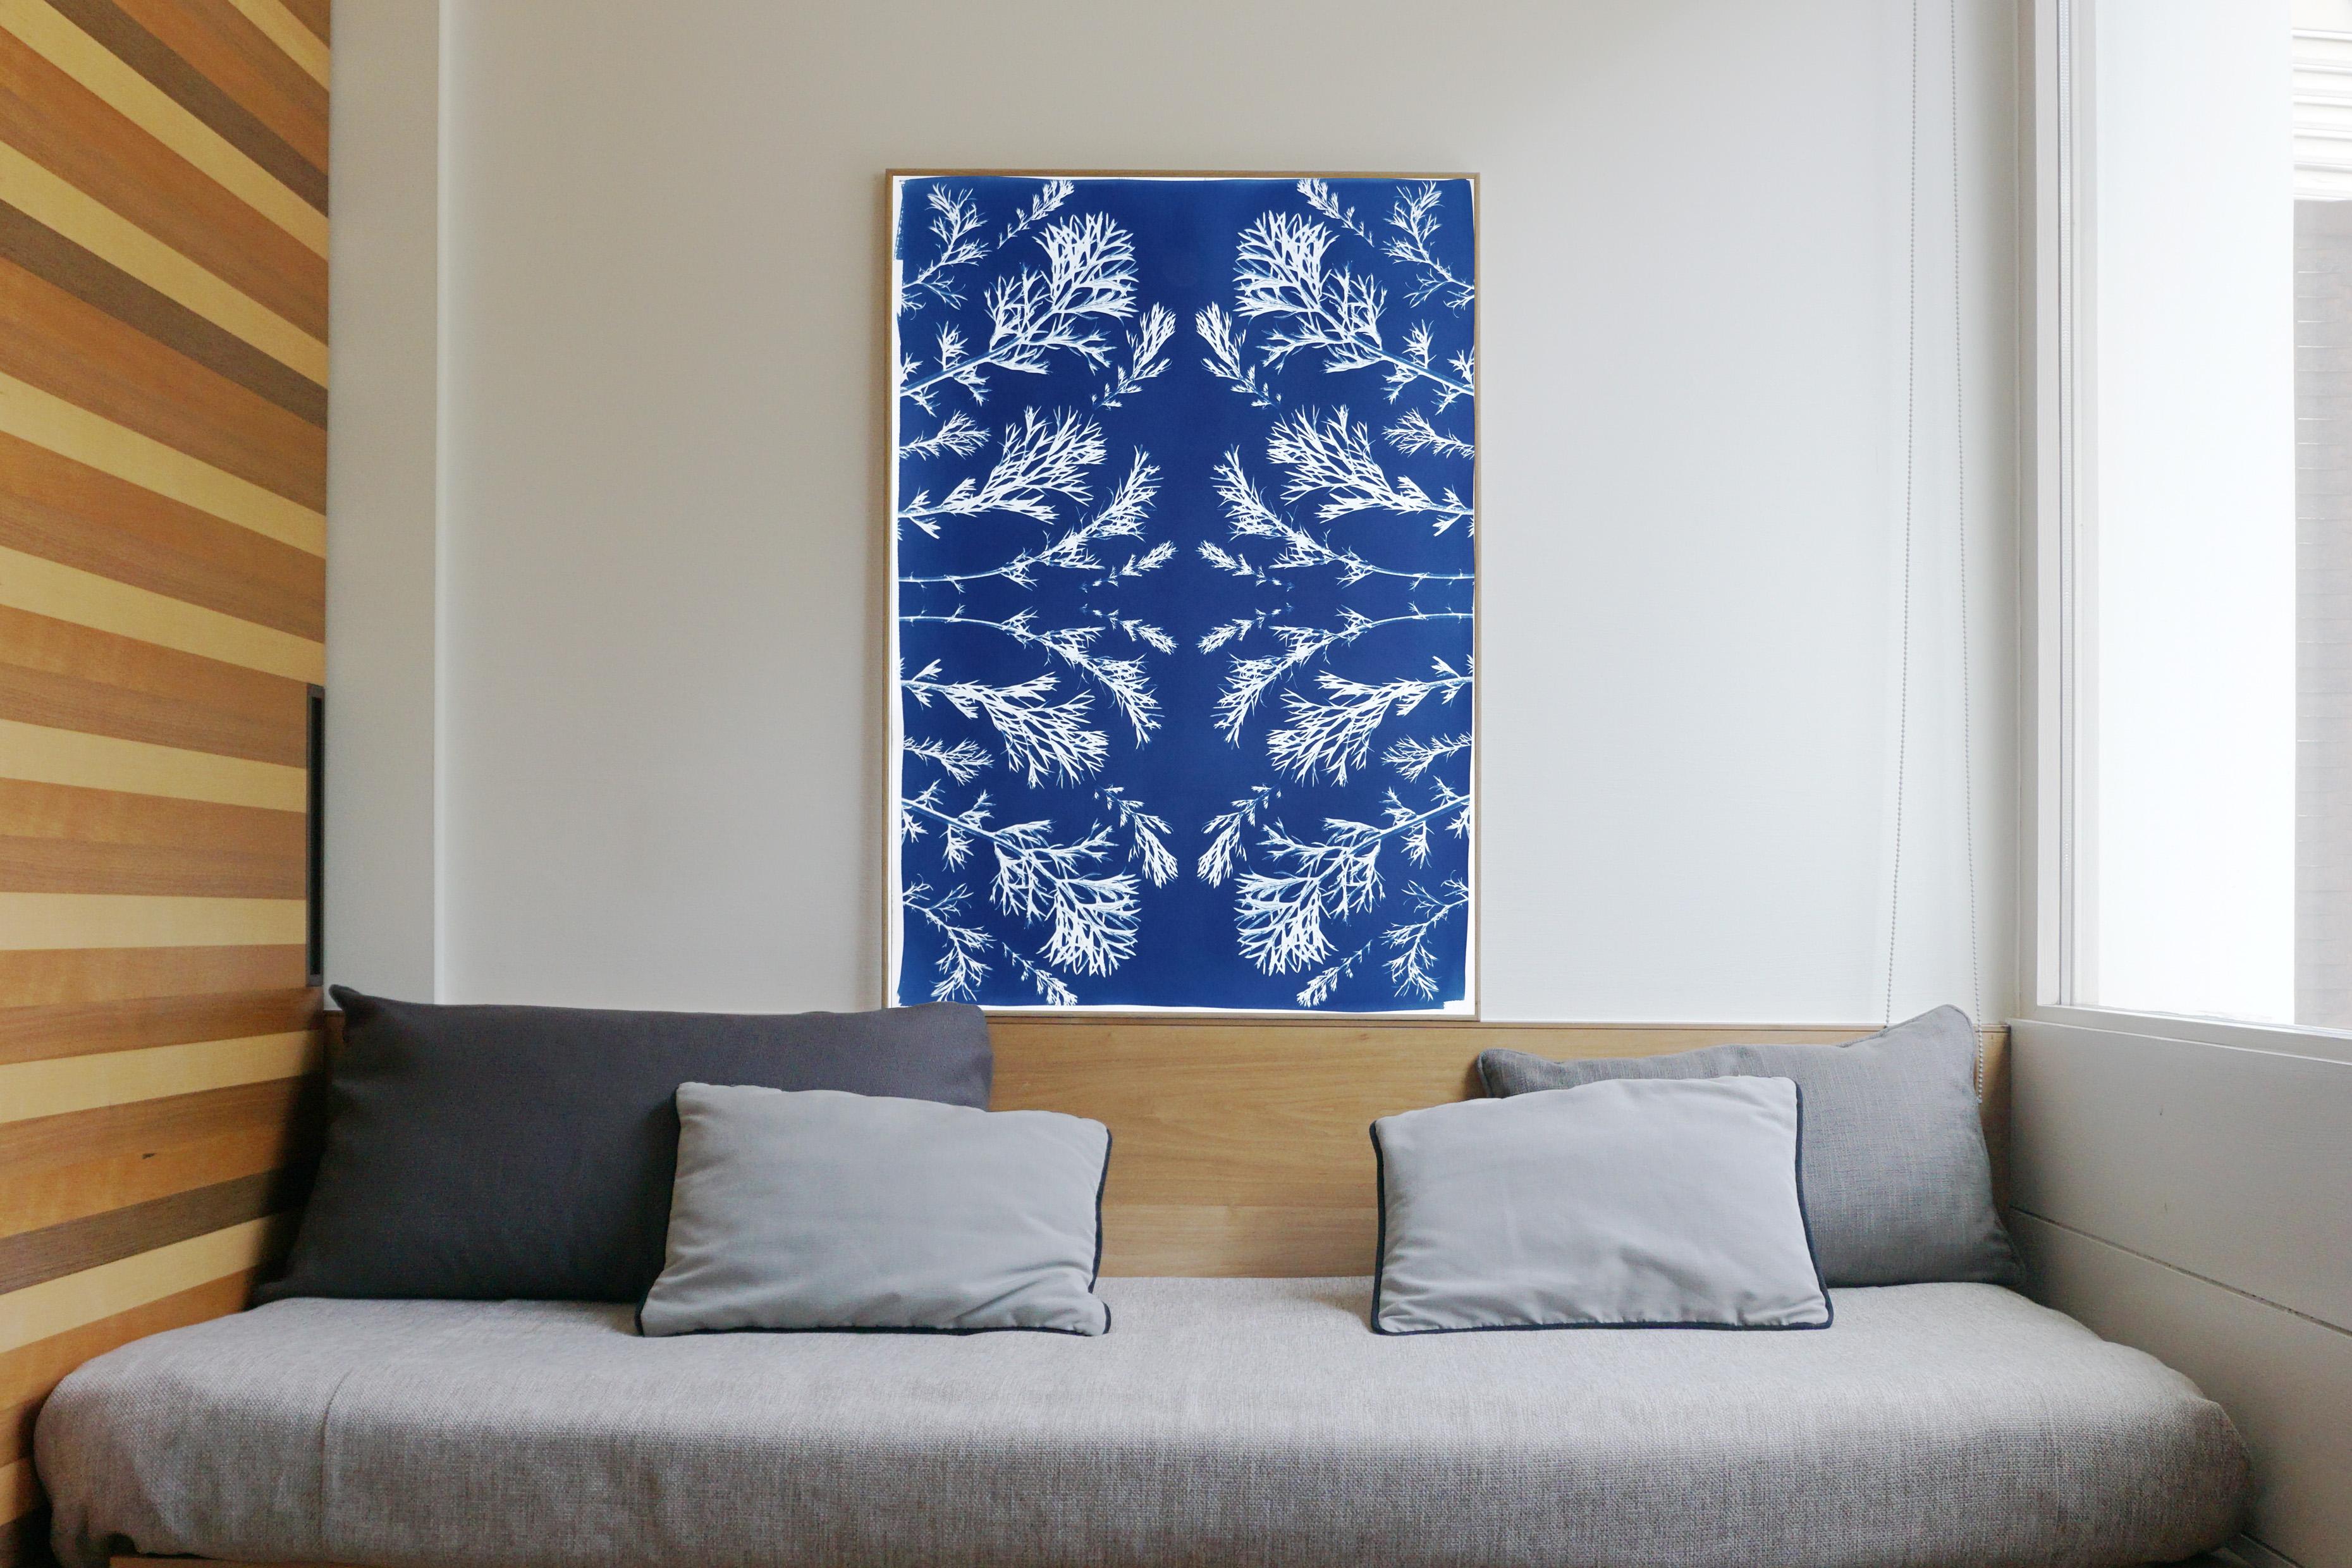 This is an exclusive handprinted limited edition cyanotype.

Details:
+ Title: Vintage Pressed Flowers Nº3
+ Year: 2021
+ Edition Size: 20
+ Stamped and Certificate of Authenticity provided
+ Measurements : 70x100 cm (28x 40 in.), a standard frame